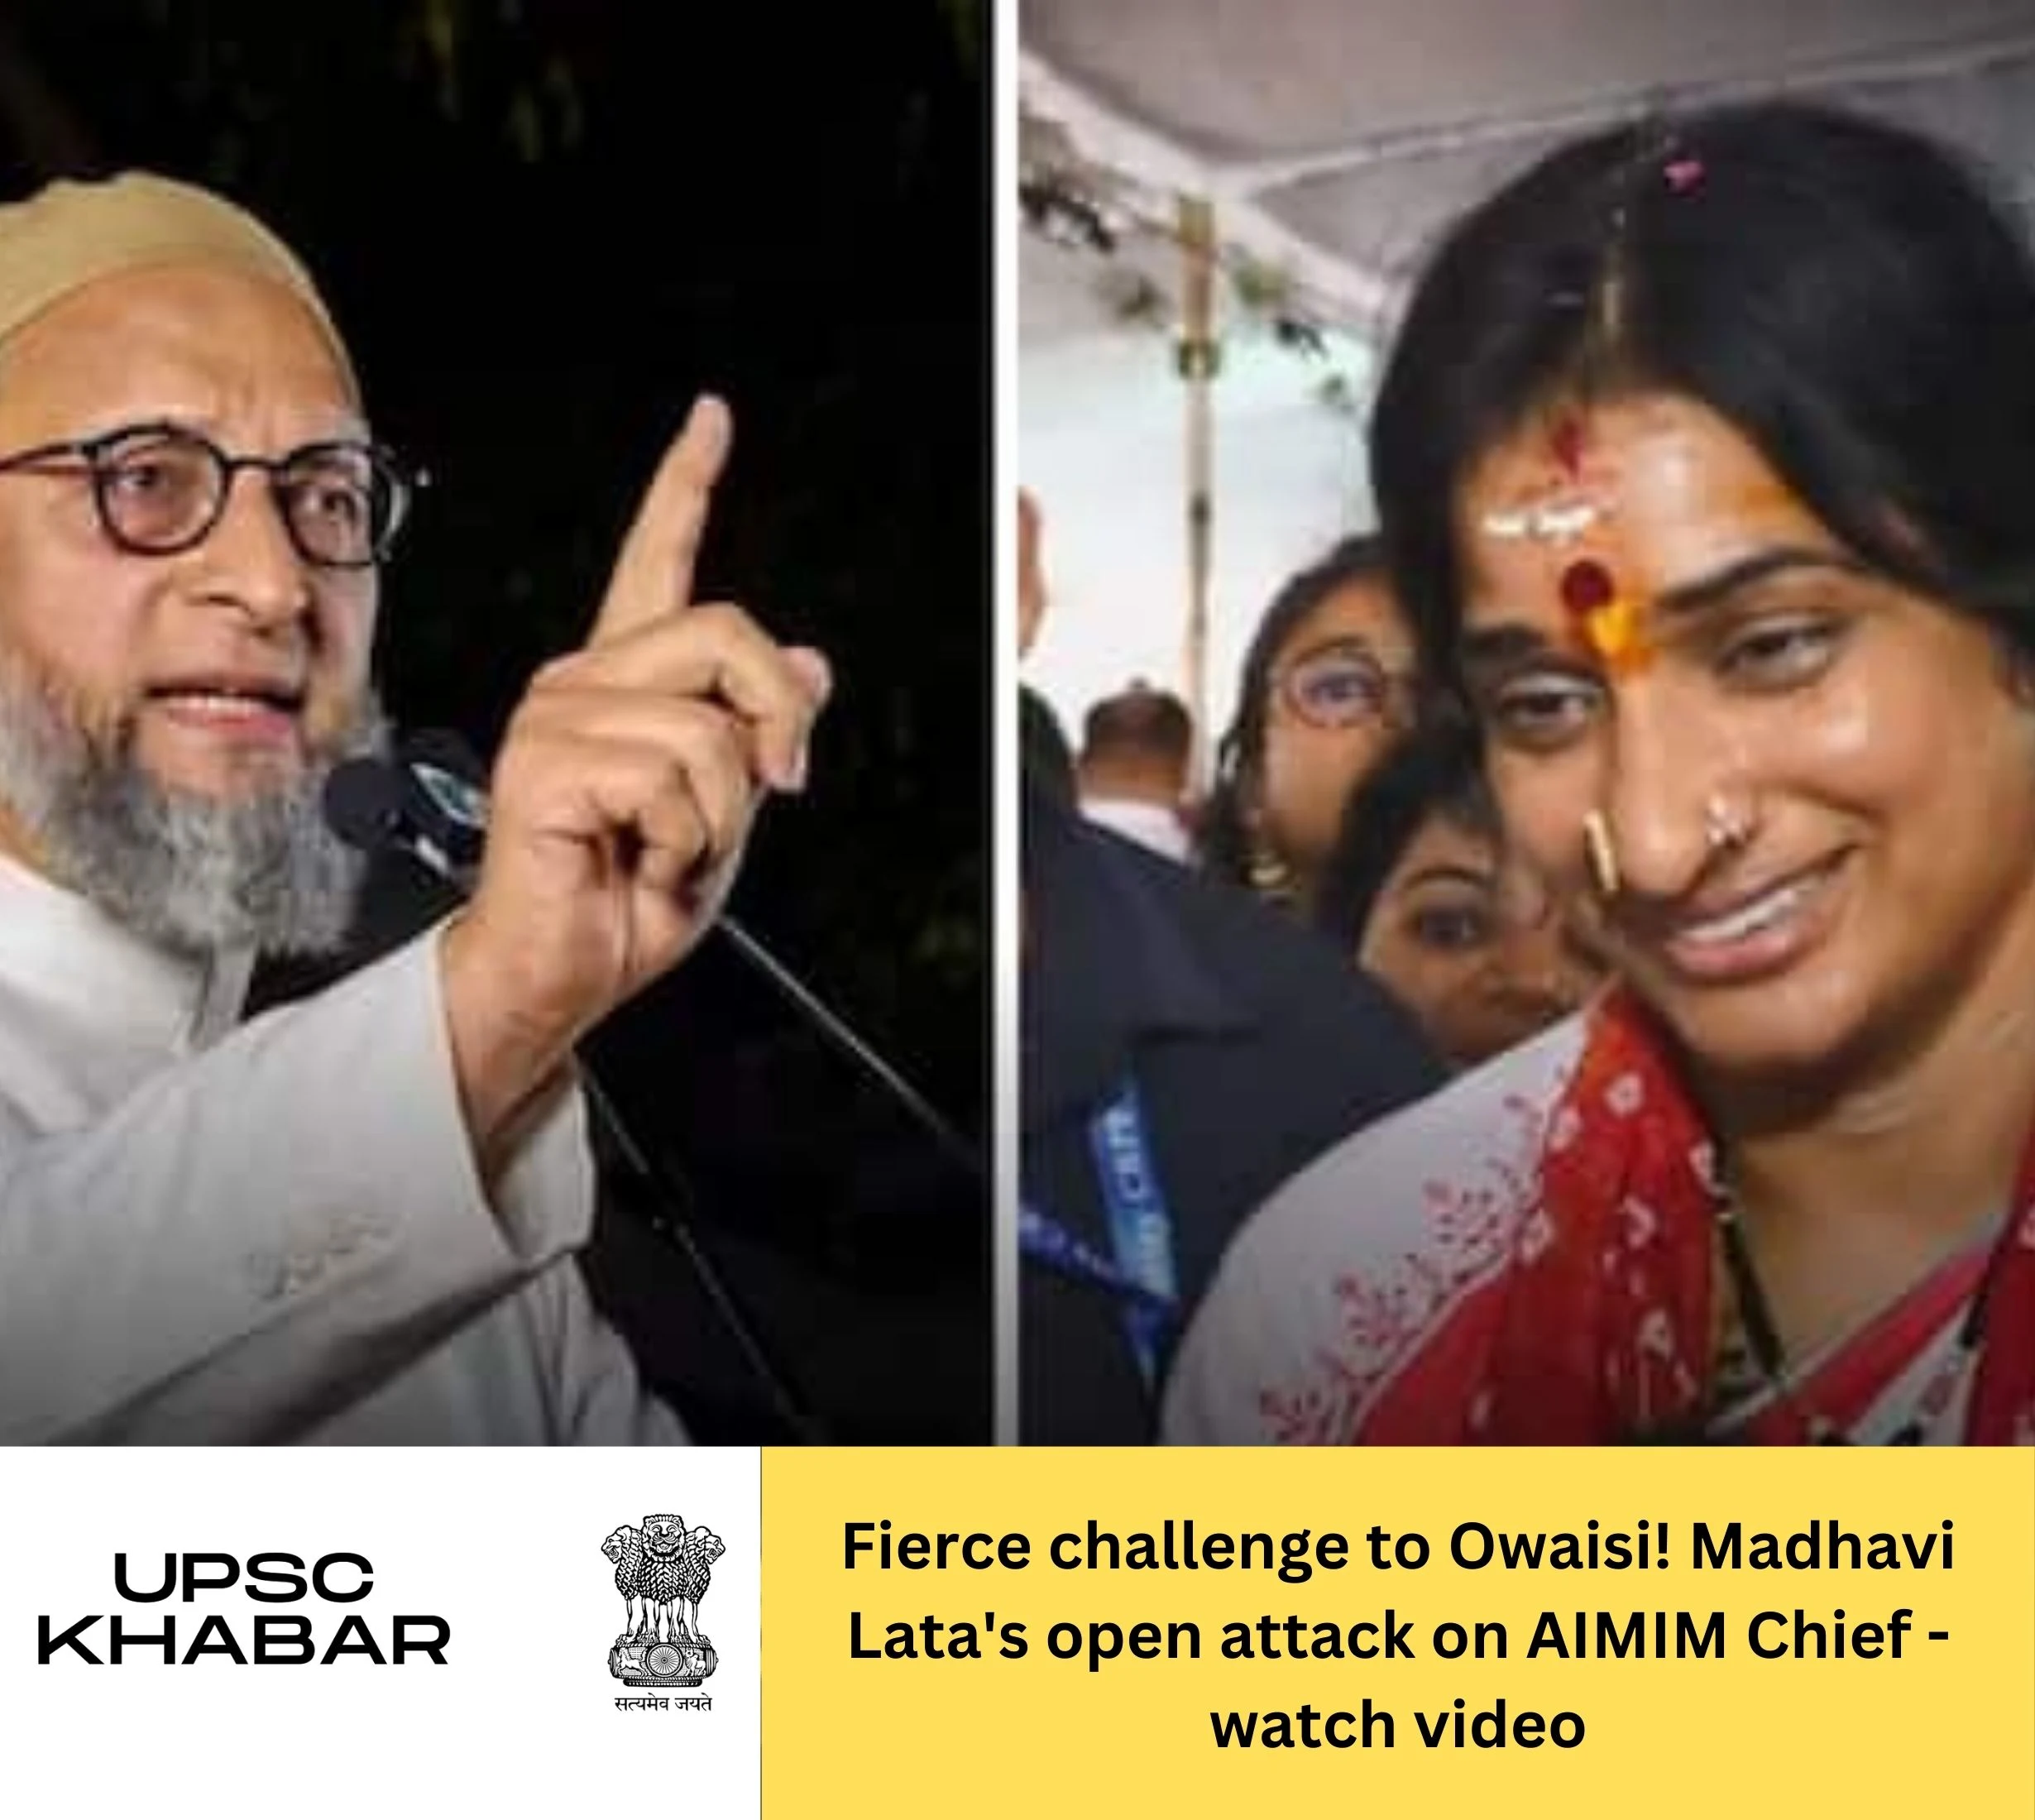 Fierce challenge to Owaisi! Madhavi Lata's open attack on AIMIM Chief - watch video